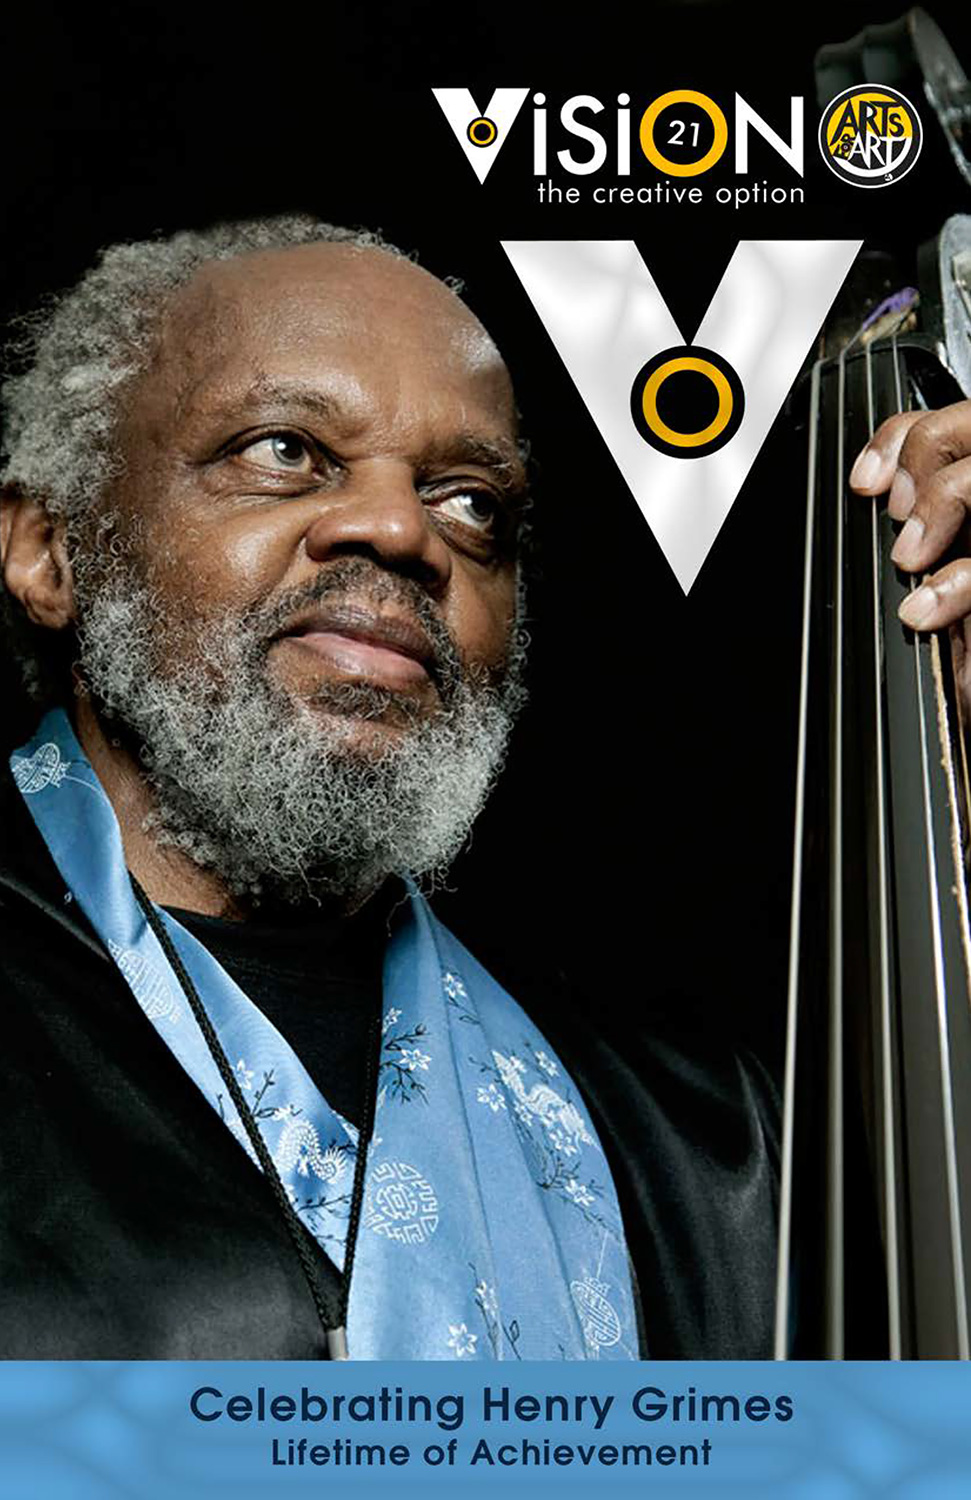 full color cover for the 21 Vision Festival brochure featuring a picture of bassist Henry Grimes and the V21 logo